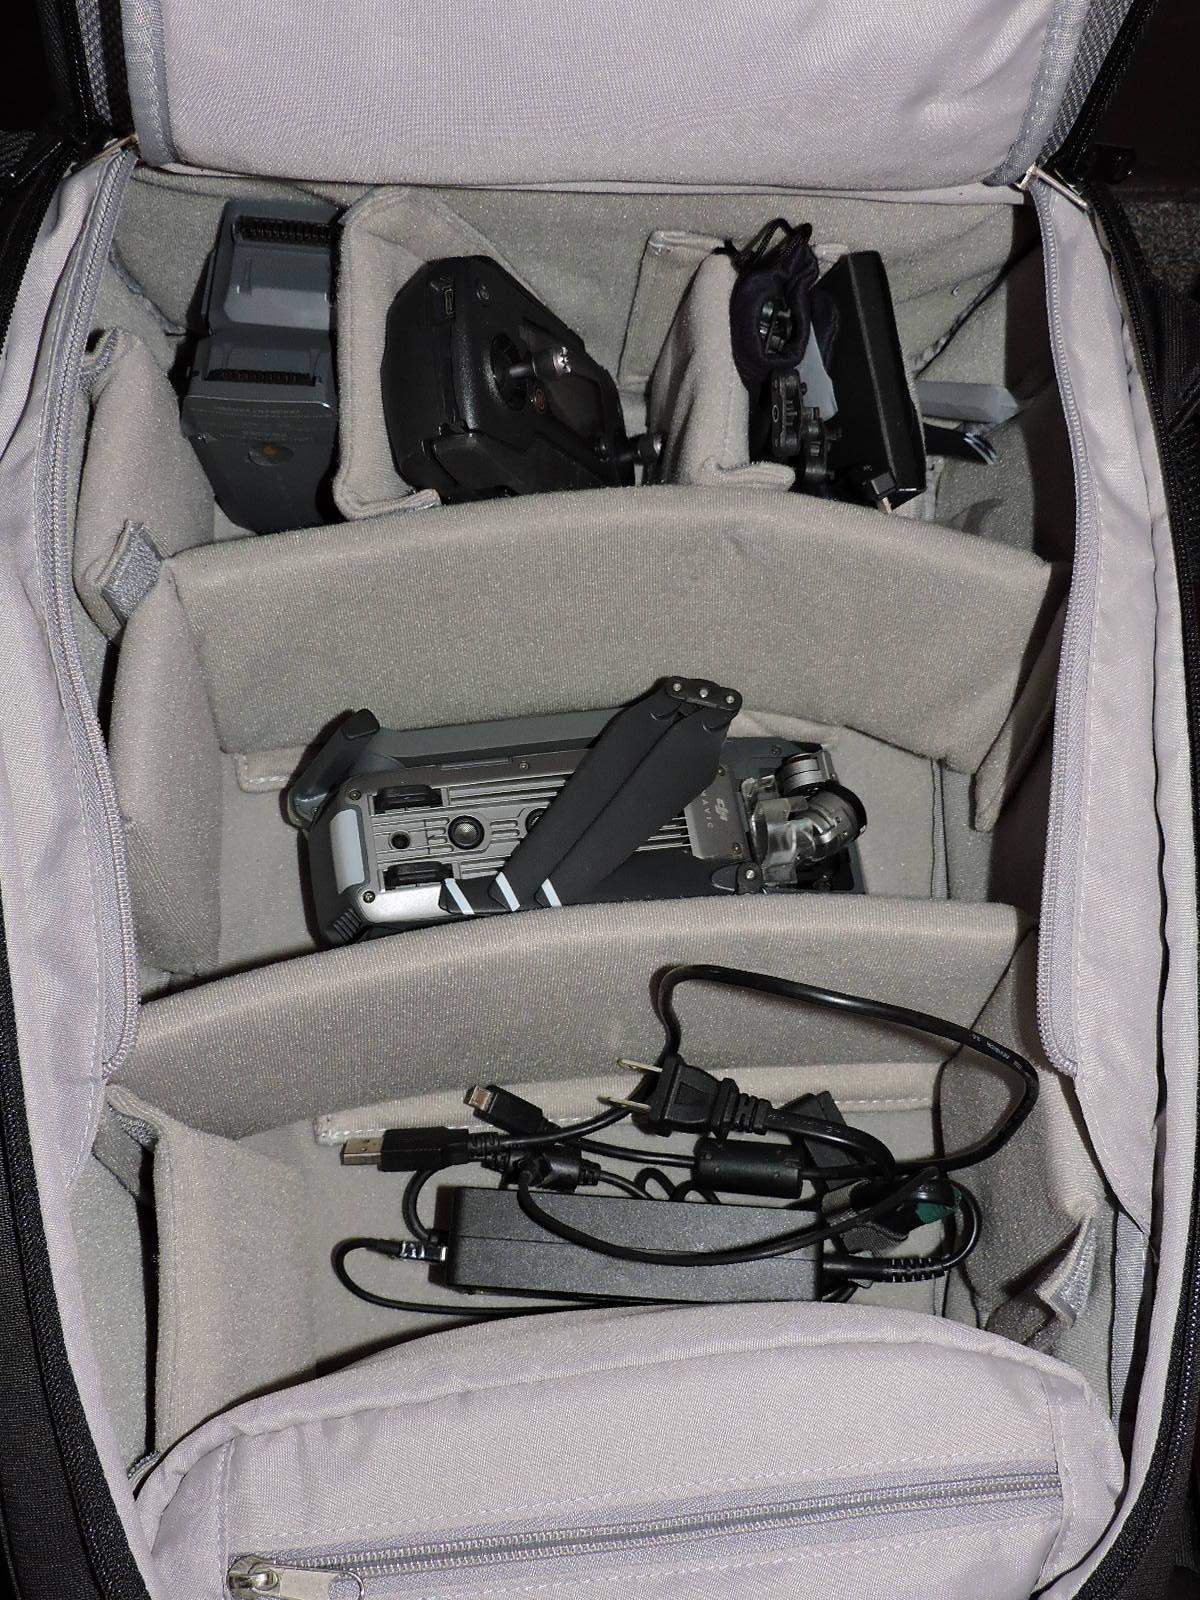 DJI MAVIC PRO Quad-Copter Drone - Complete Kit with Backpack-Case.